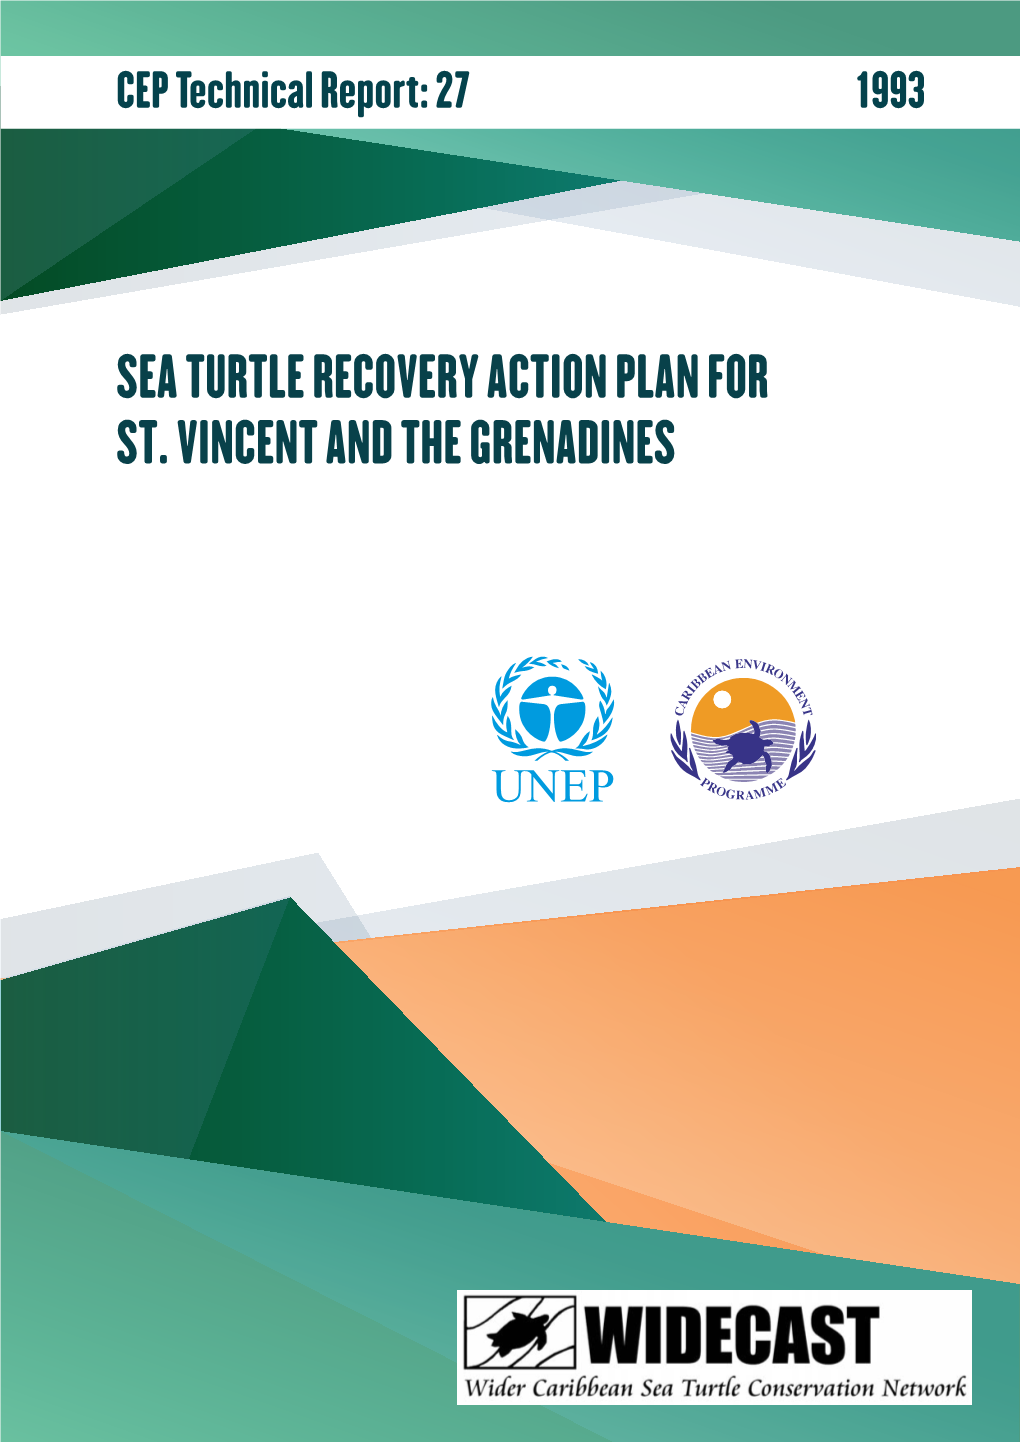 SEA TURTLE RECOVERY ACTION PLAN for ST. VINCENT and the GRENADINES Note